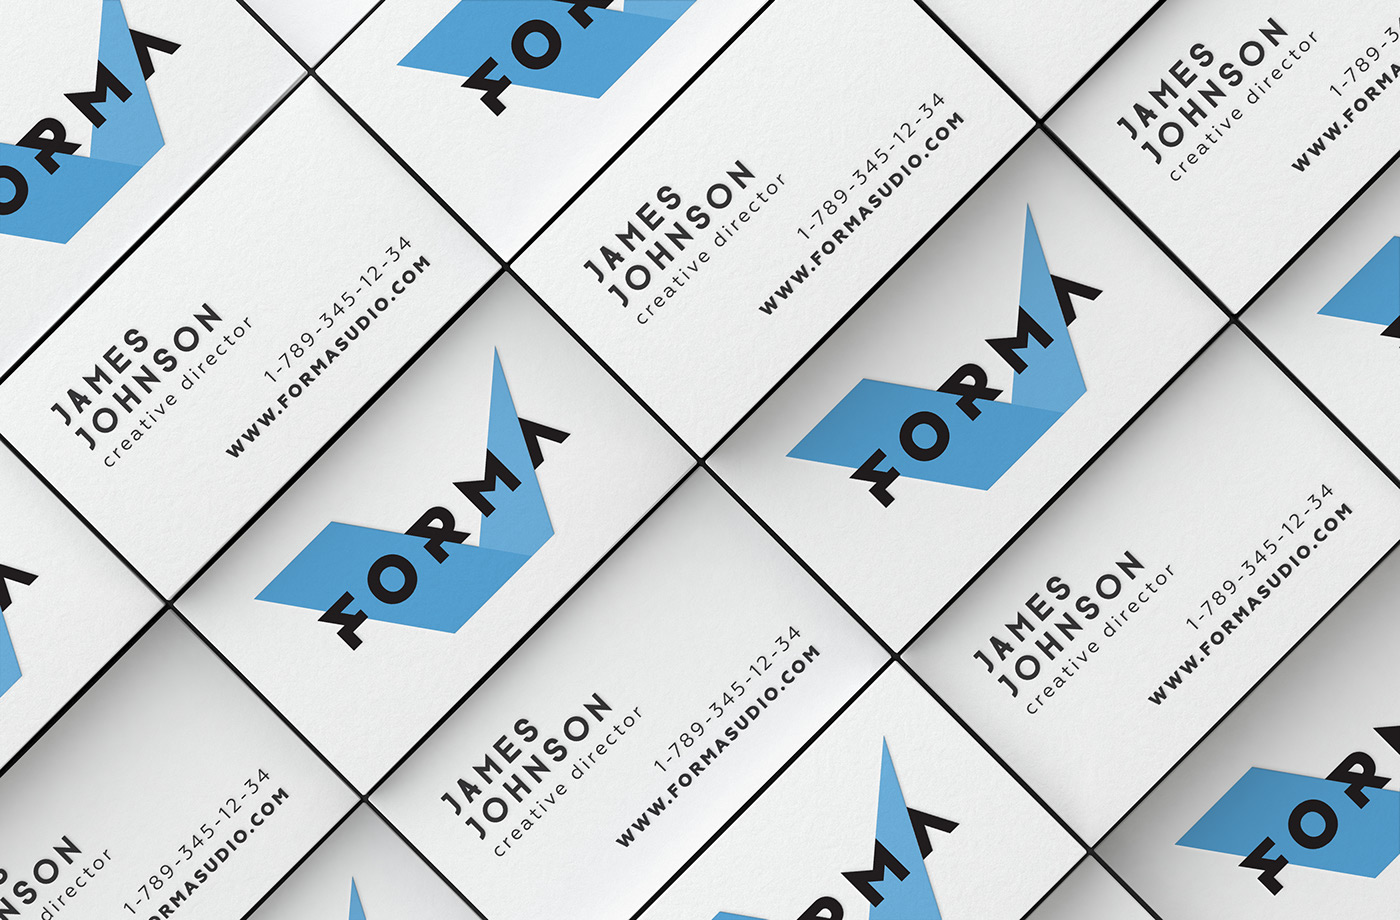 Mockup mock-up free freebie psd Business Cards free mockup  download realistic clean